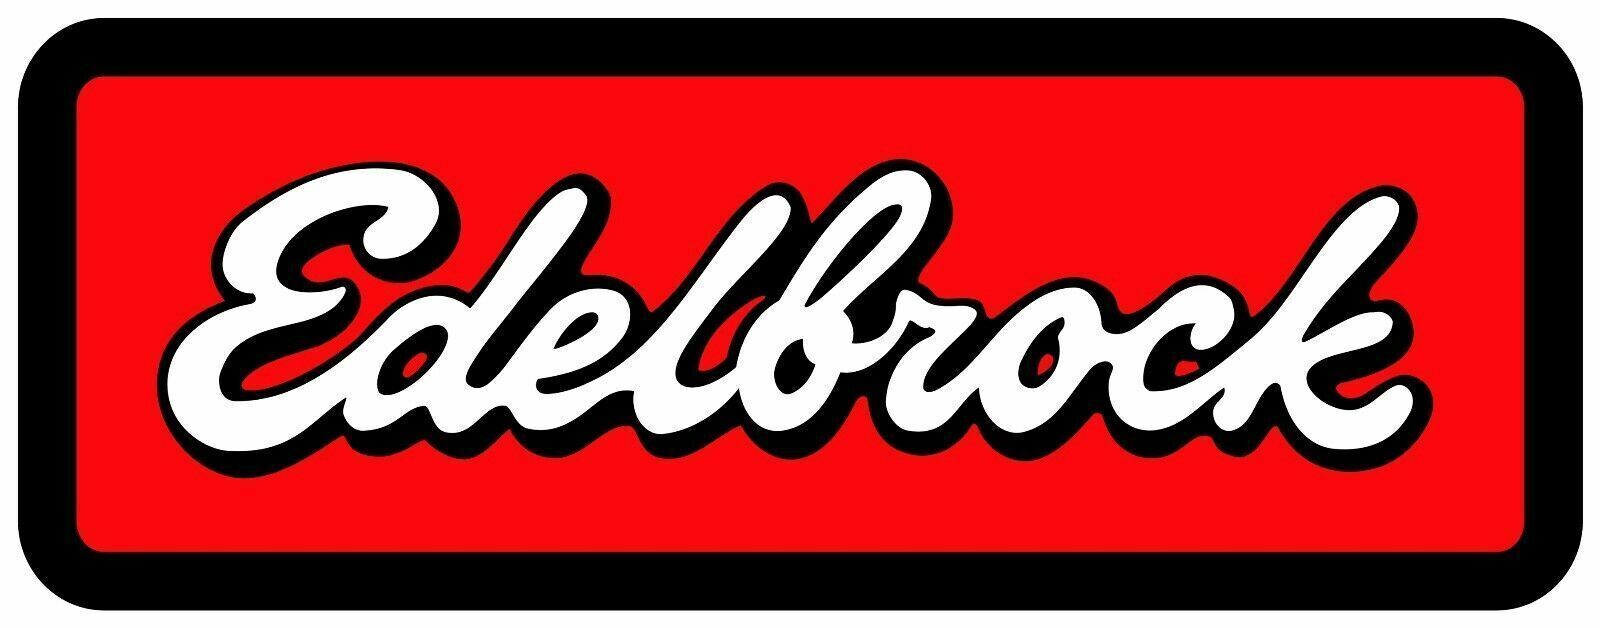 EDELBROCK Decal Sticker  Logo Sticker / Vinyl Decal  | 10 Sizes with TRACKING